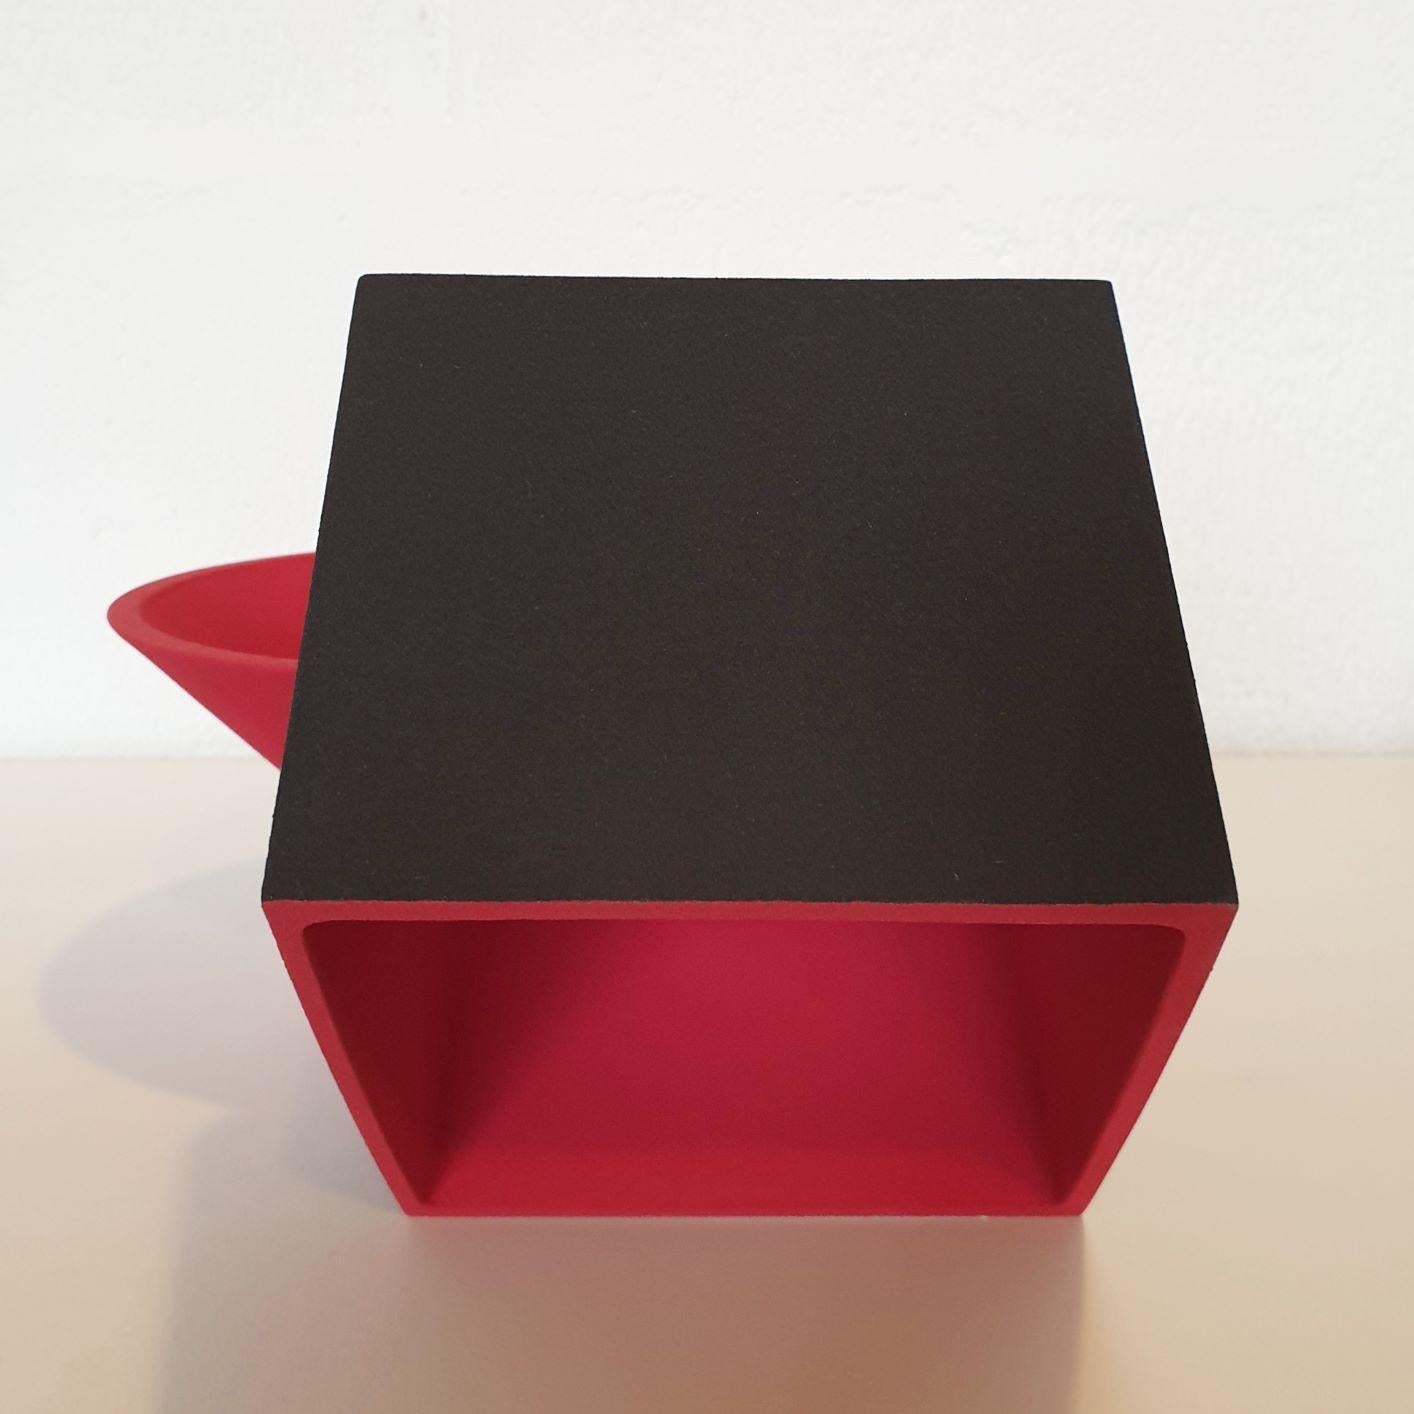 Sculpture SC1601 (red) is a remarkable contemporary modern abstract geometric object sculpture by Dutch visual artist Let de Kok and it is the second last available from this specific series! This sculpture consists of a cubical and conical element